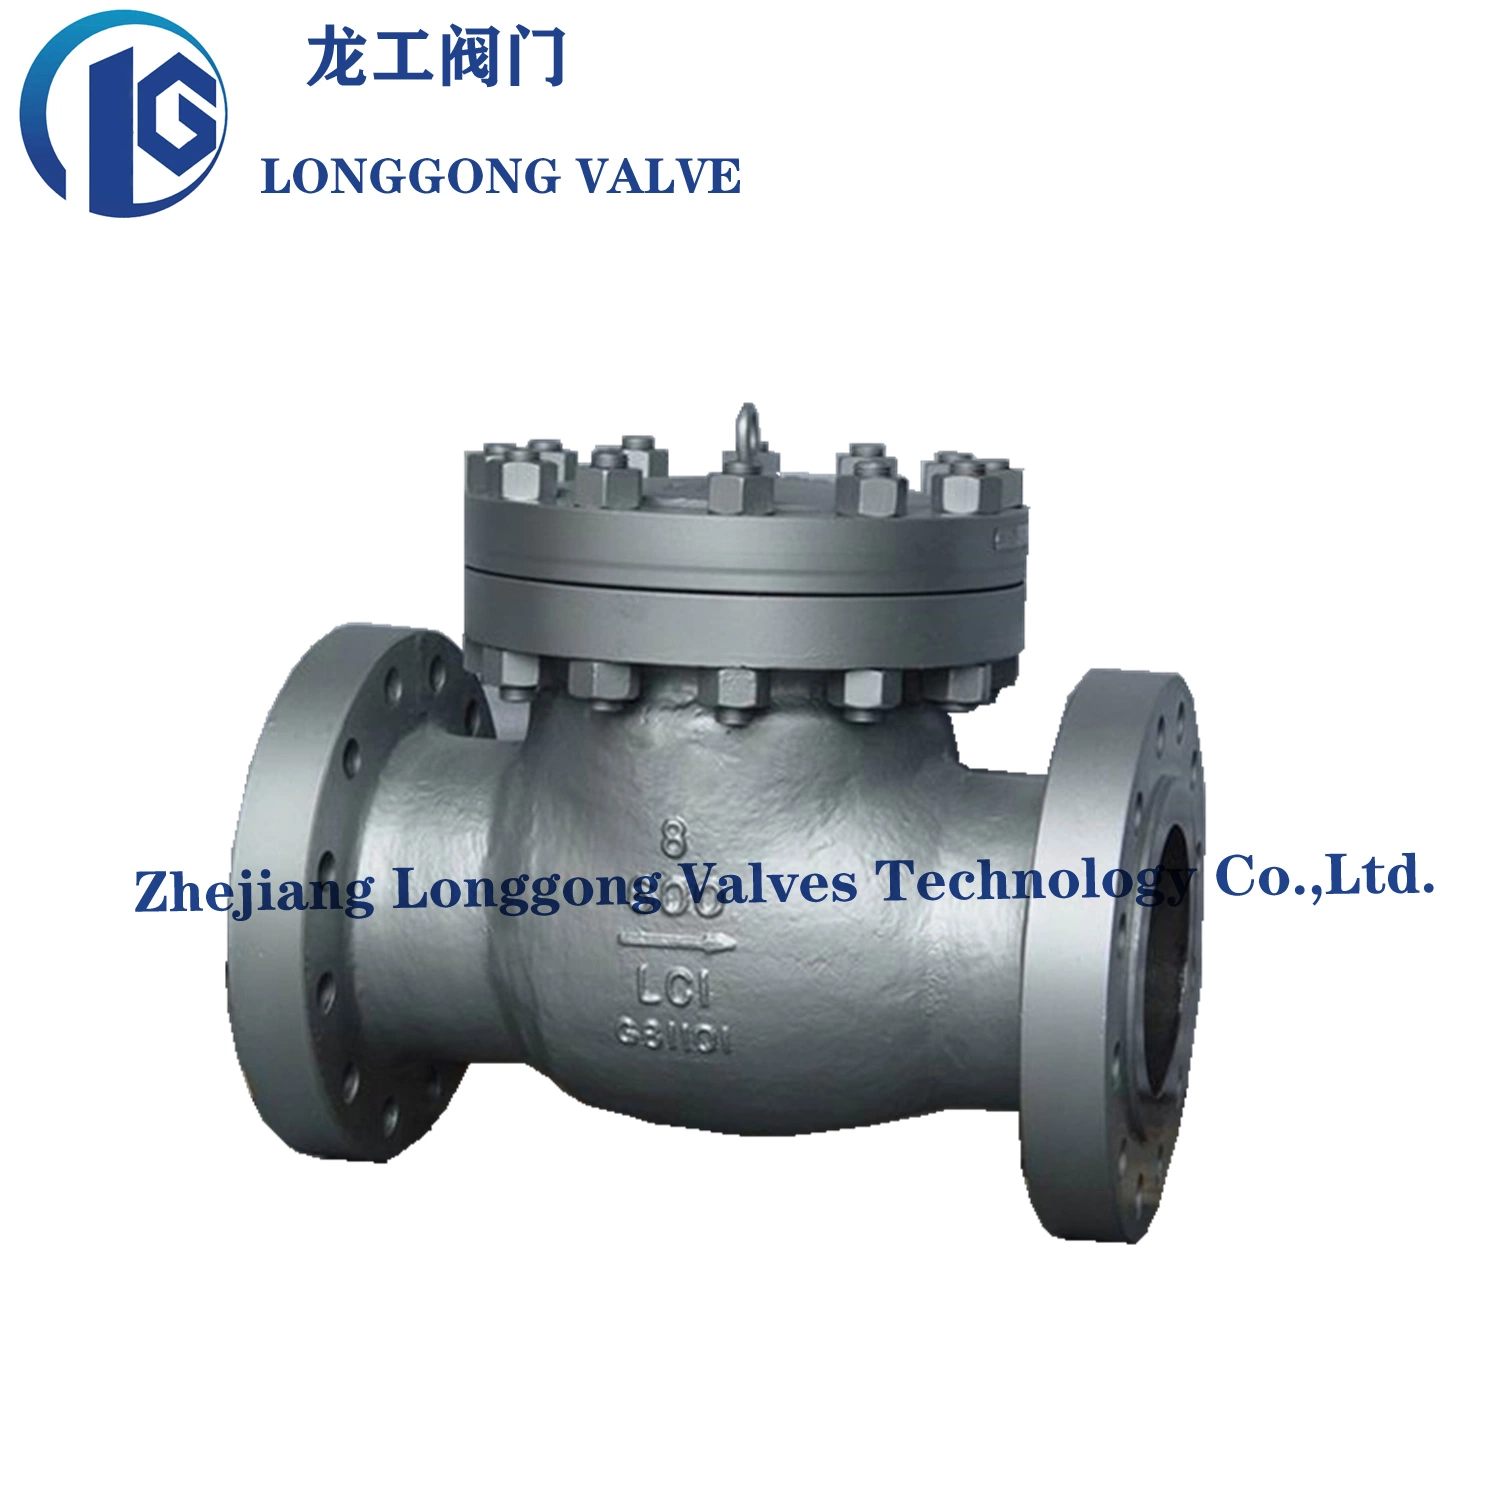 High quality/High cost performance  Pressure Seal Stainless Steel Butt Welded Non Return Swing Check Valve Wcb/CF8/CF8m/Wc6/Wcc